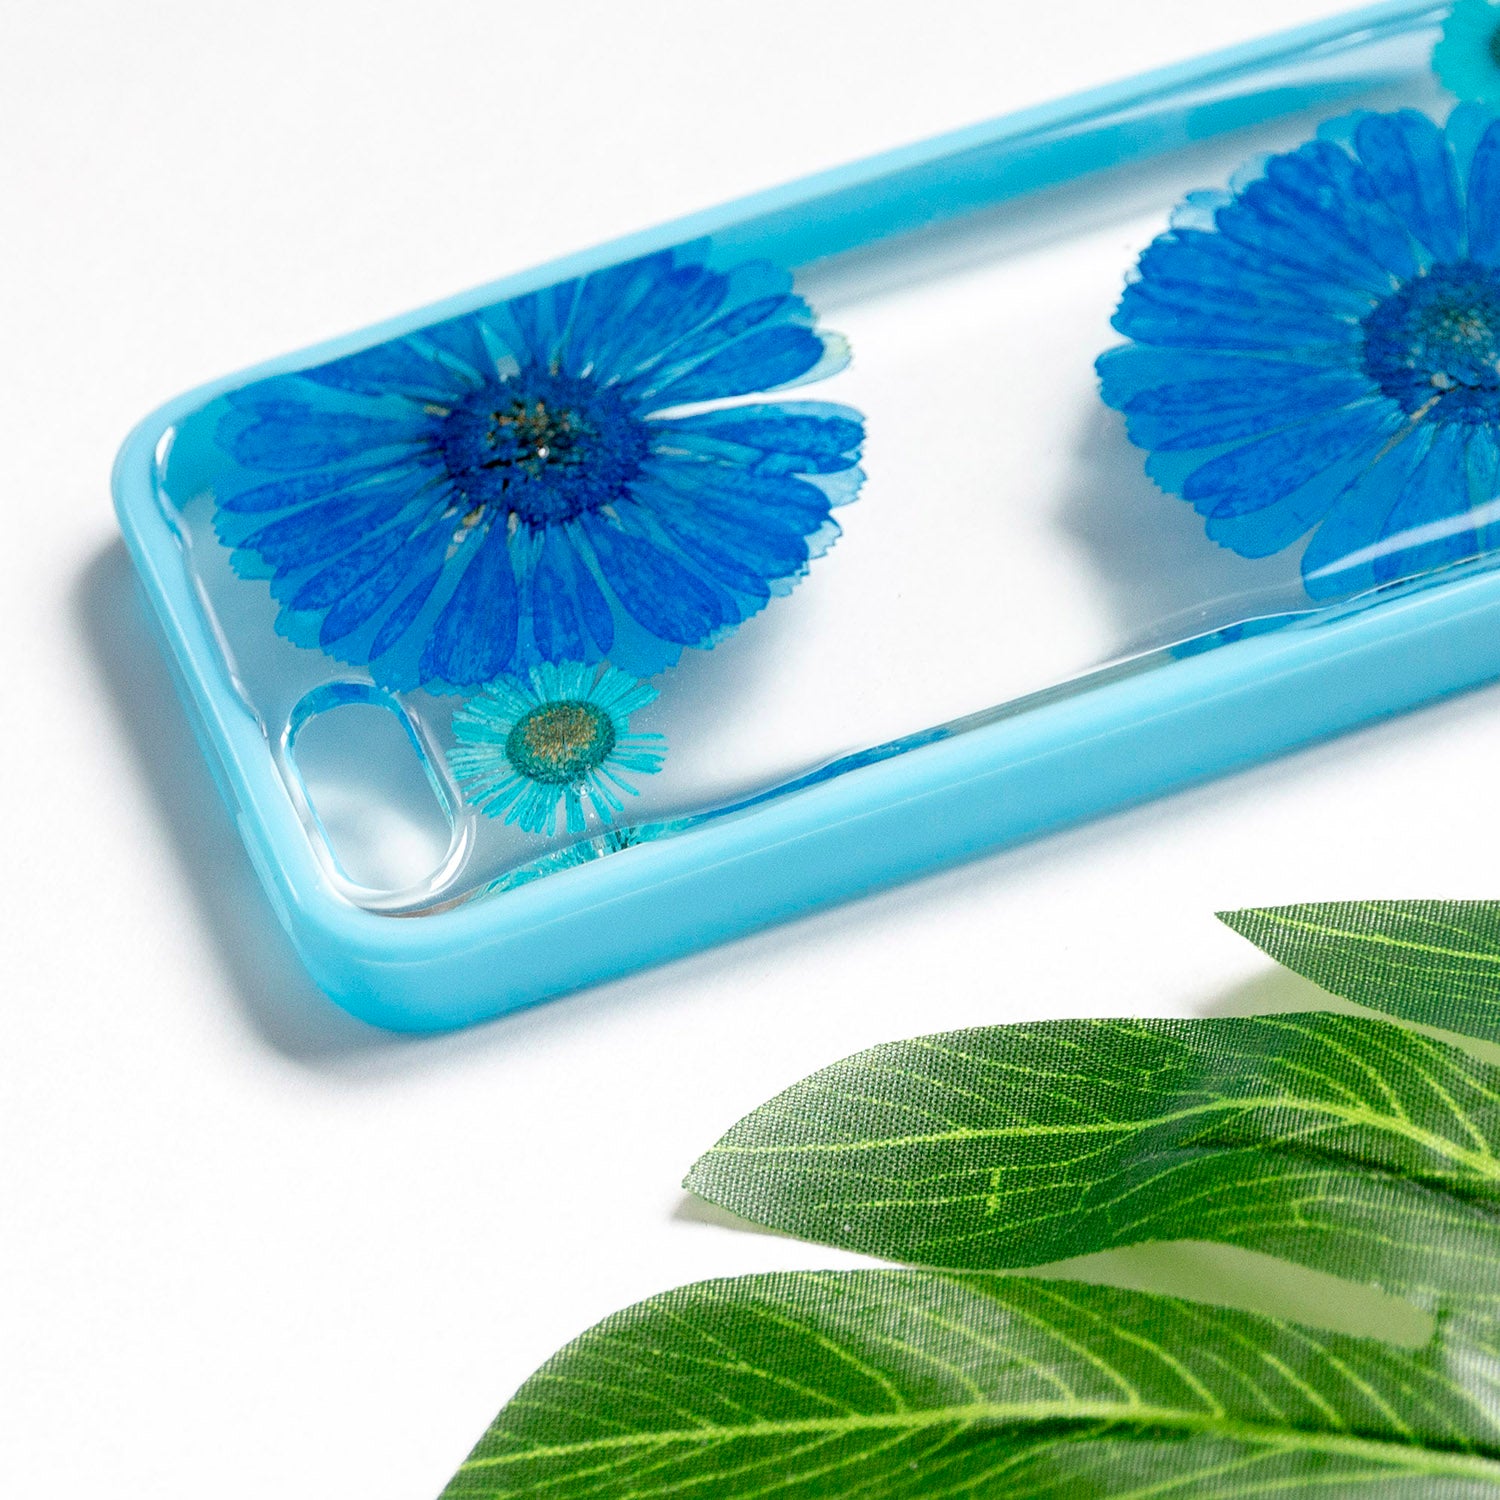 Floral Neverland Floralfy Blue Sapphire Real Pressed Blue Daisy Flower Floral Foliage Botanical iPhone 5 5s SE Bumper Case 04